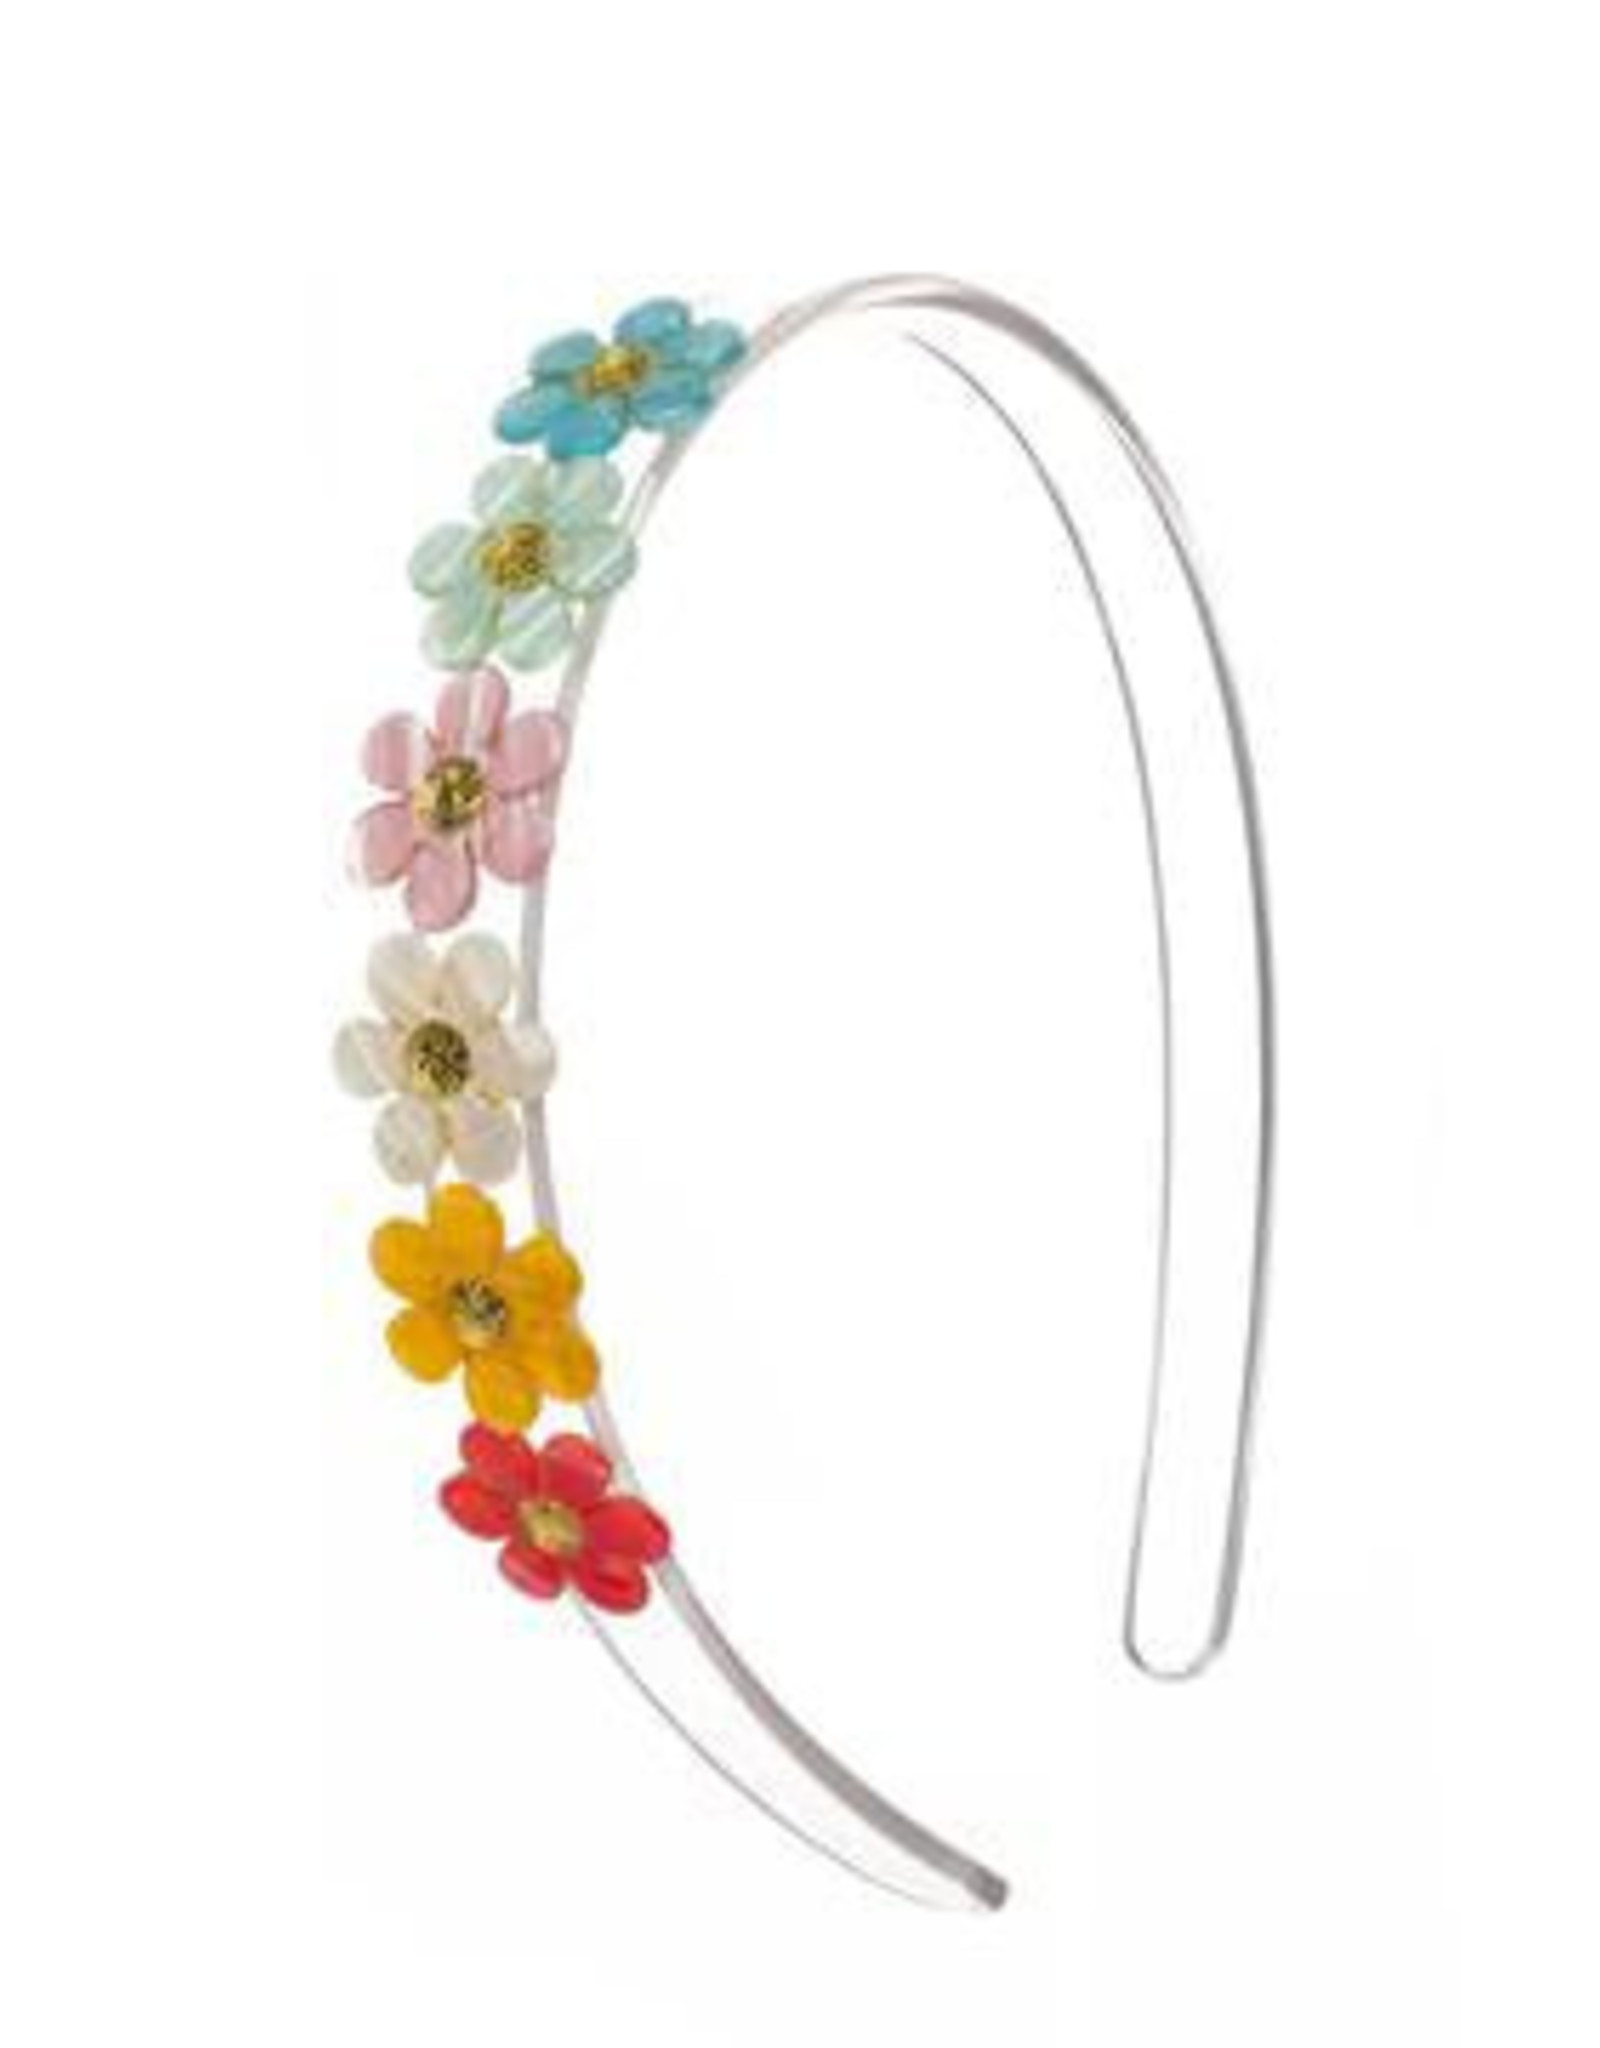 Lilies & Roses LR Headband Pearlized Pastel Flowers H011A-23N